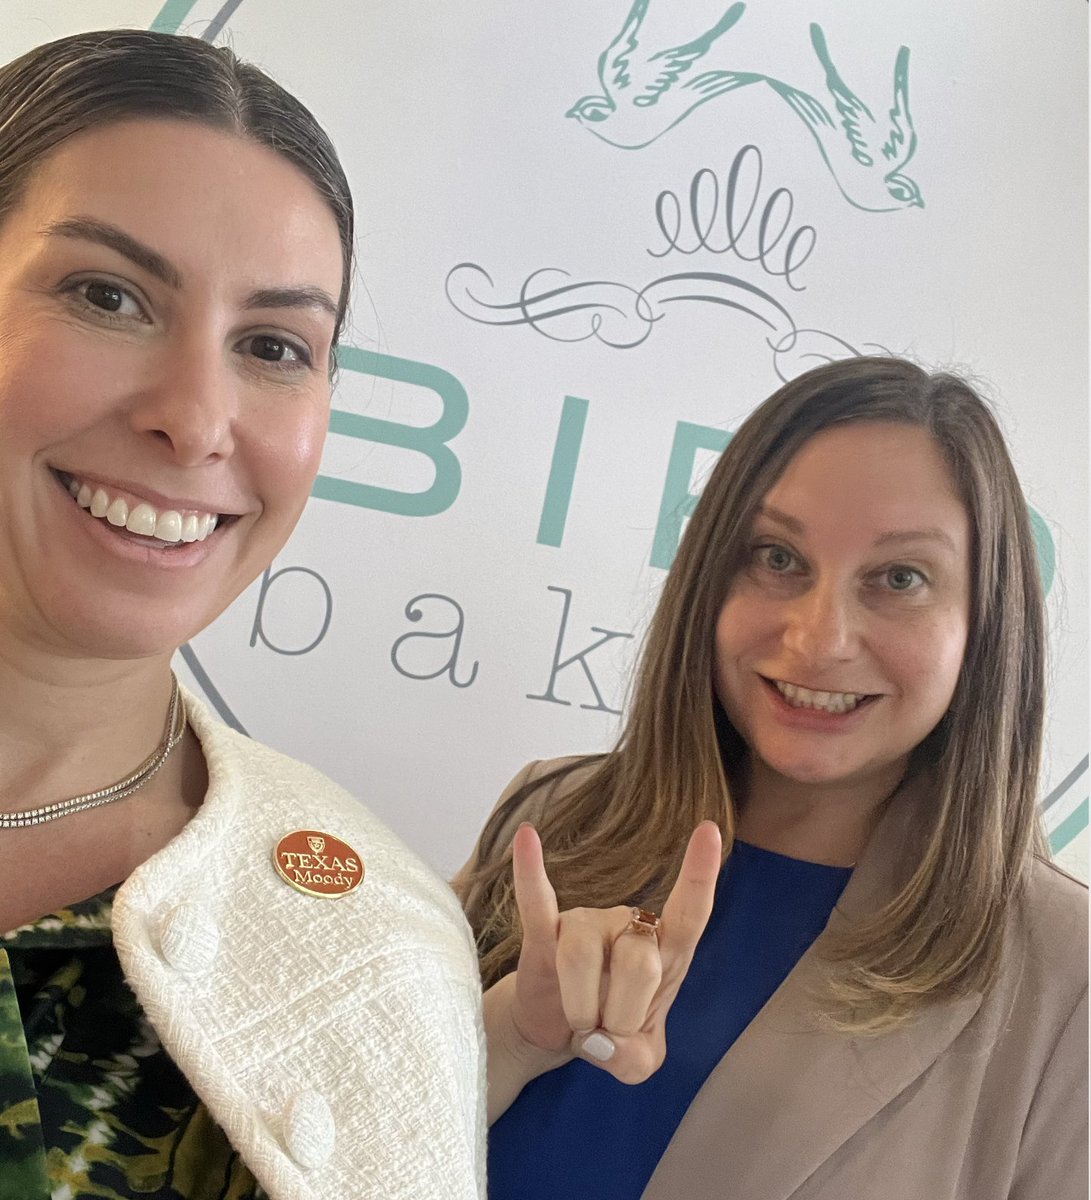 Our interim chief development officer, Virginia Anderson, and I met with friends of the college at @BIRDbakery in Dallas, owned by #TEXASMoody alum Elizabeth Chambers.